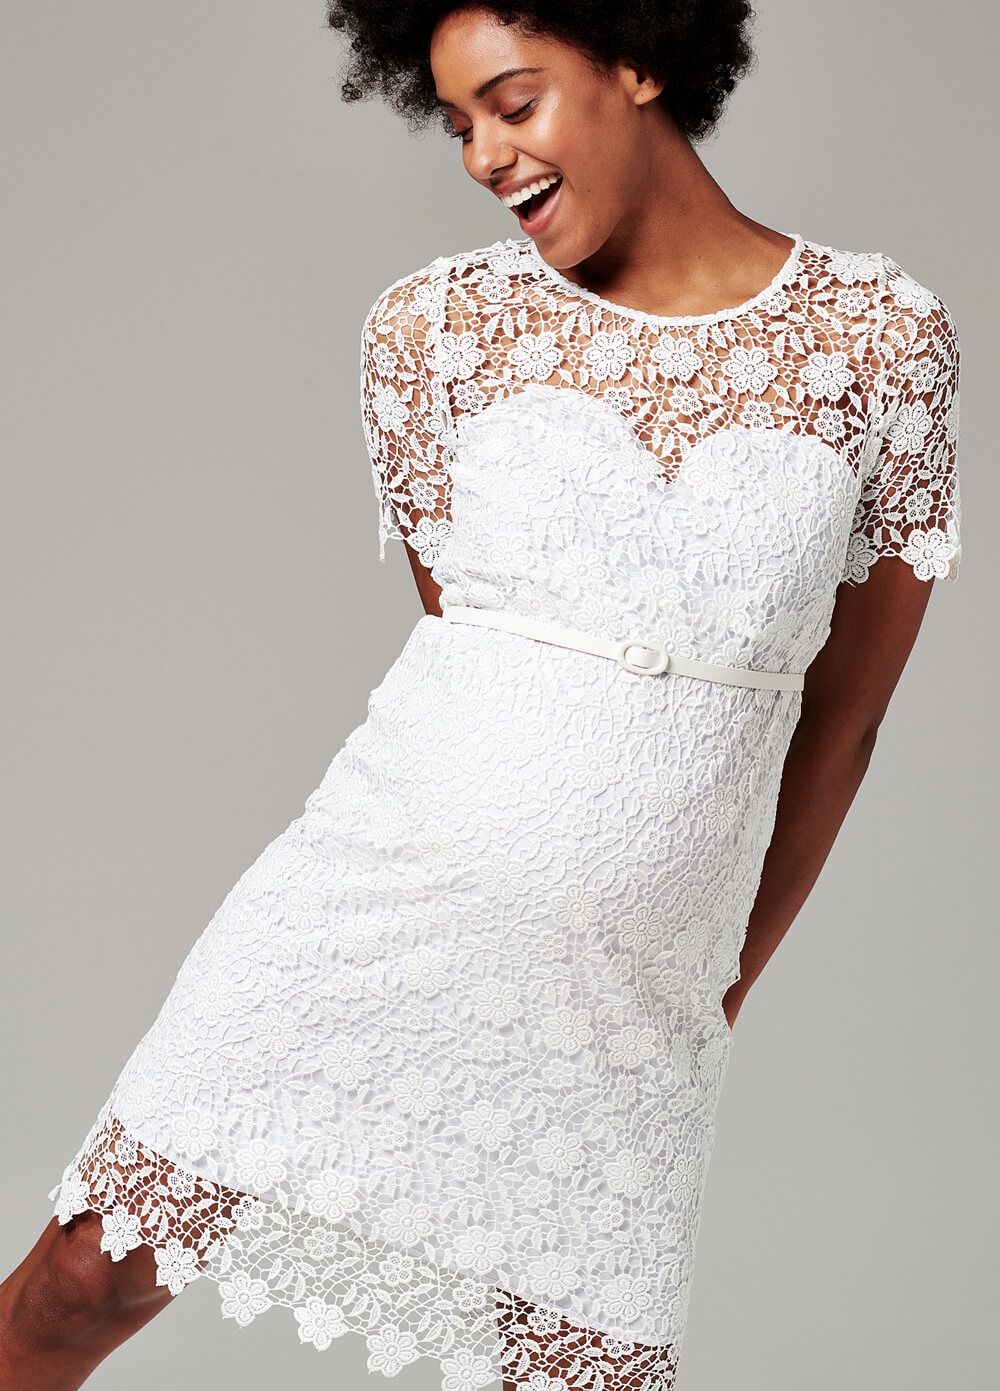 Esprit White Lace Occasion Maternity Dress w Belt | Queen Bee